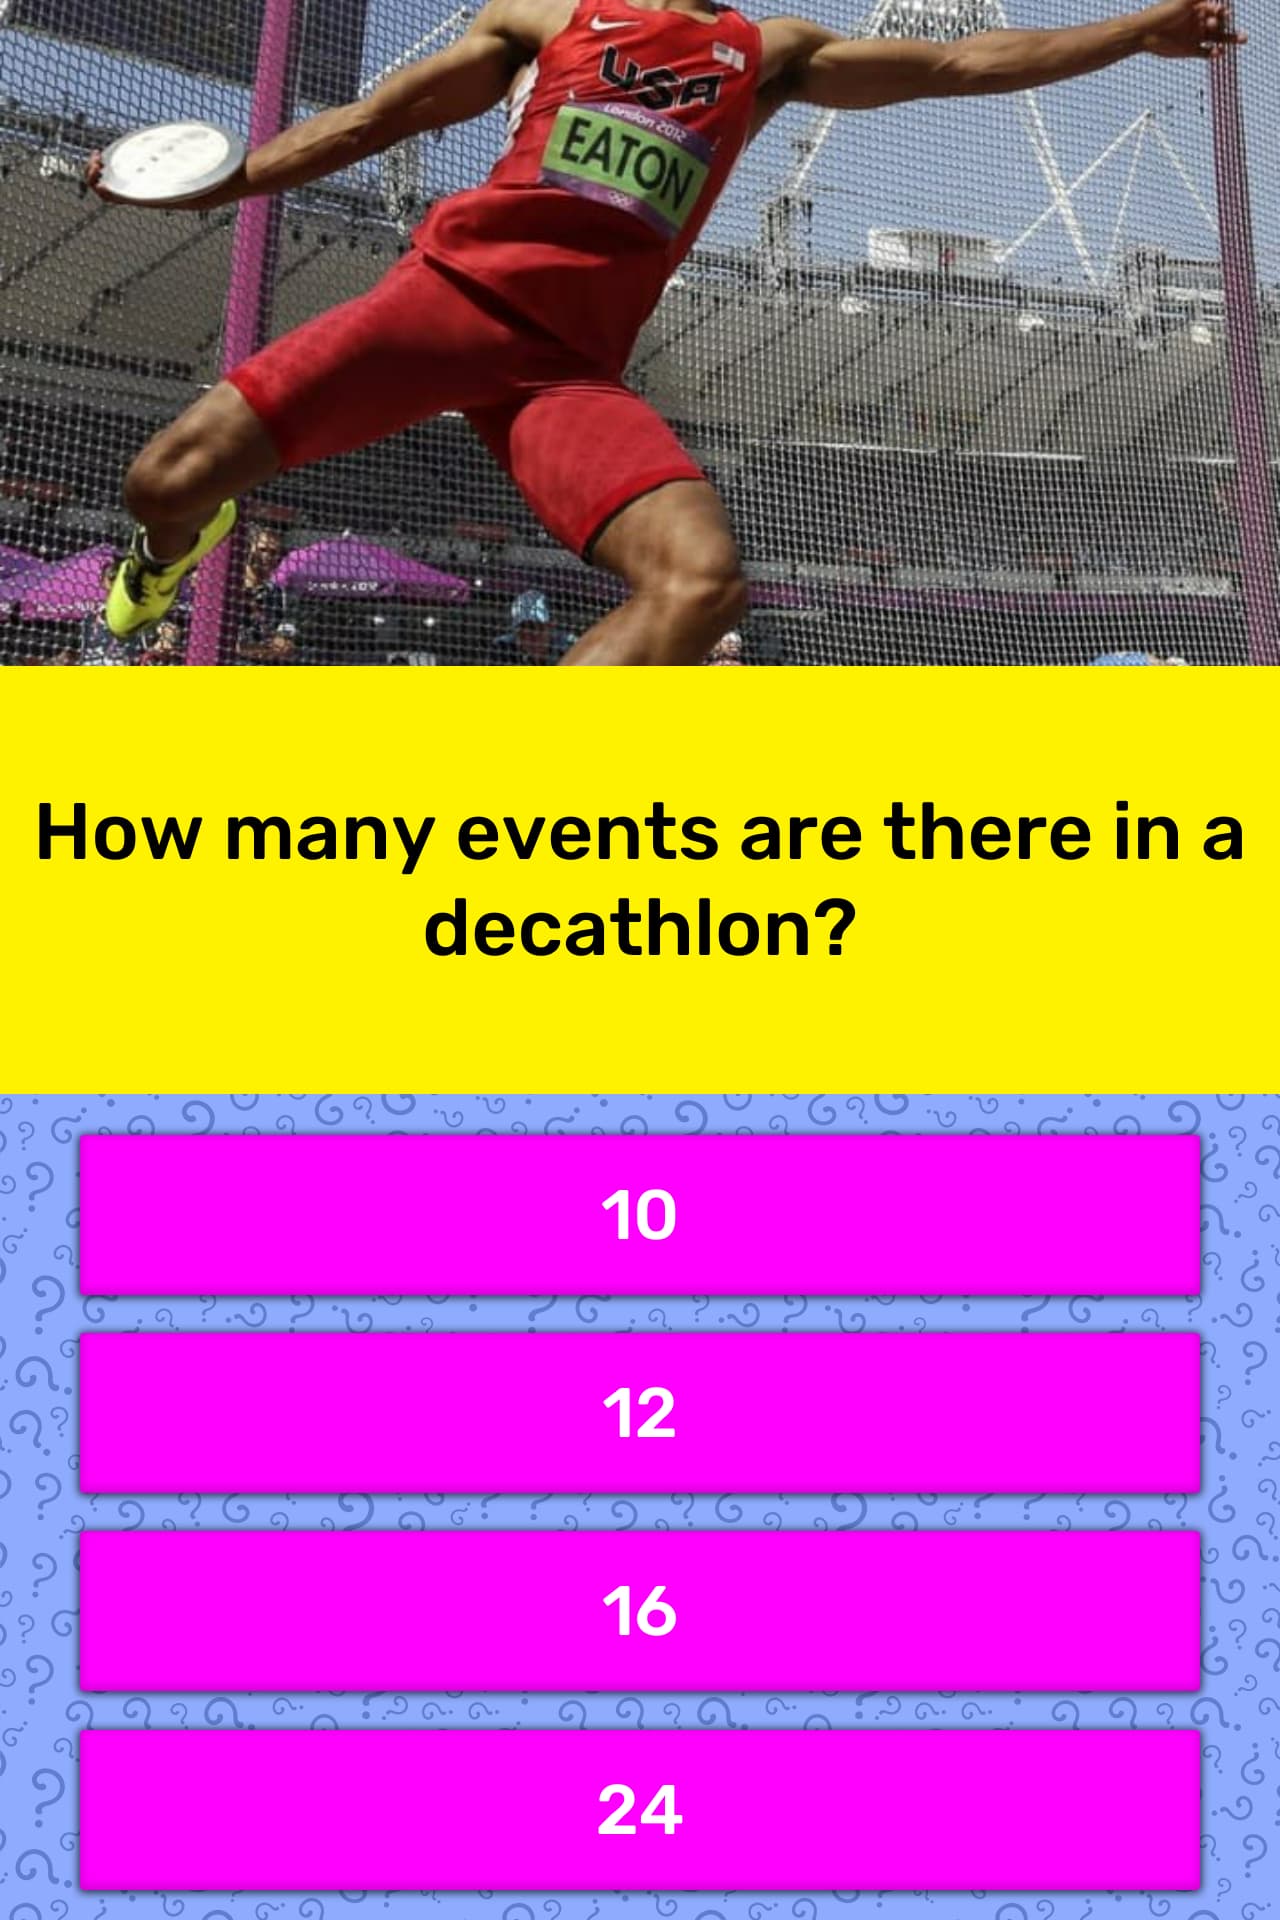 what are the 10 events in the decathlon